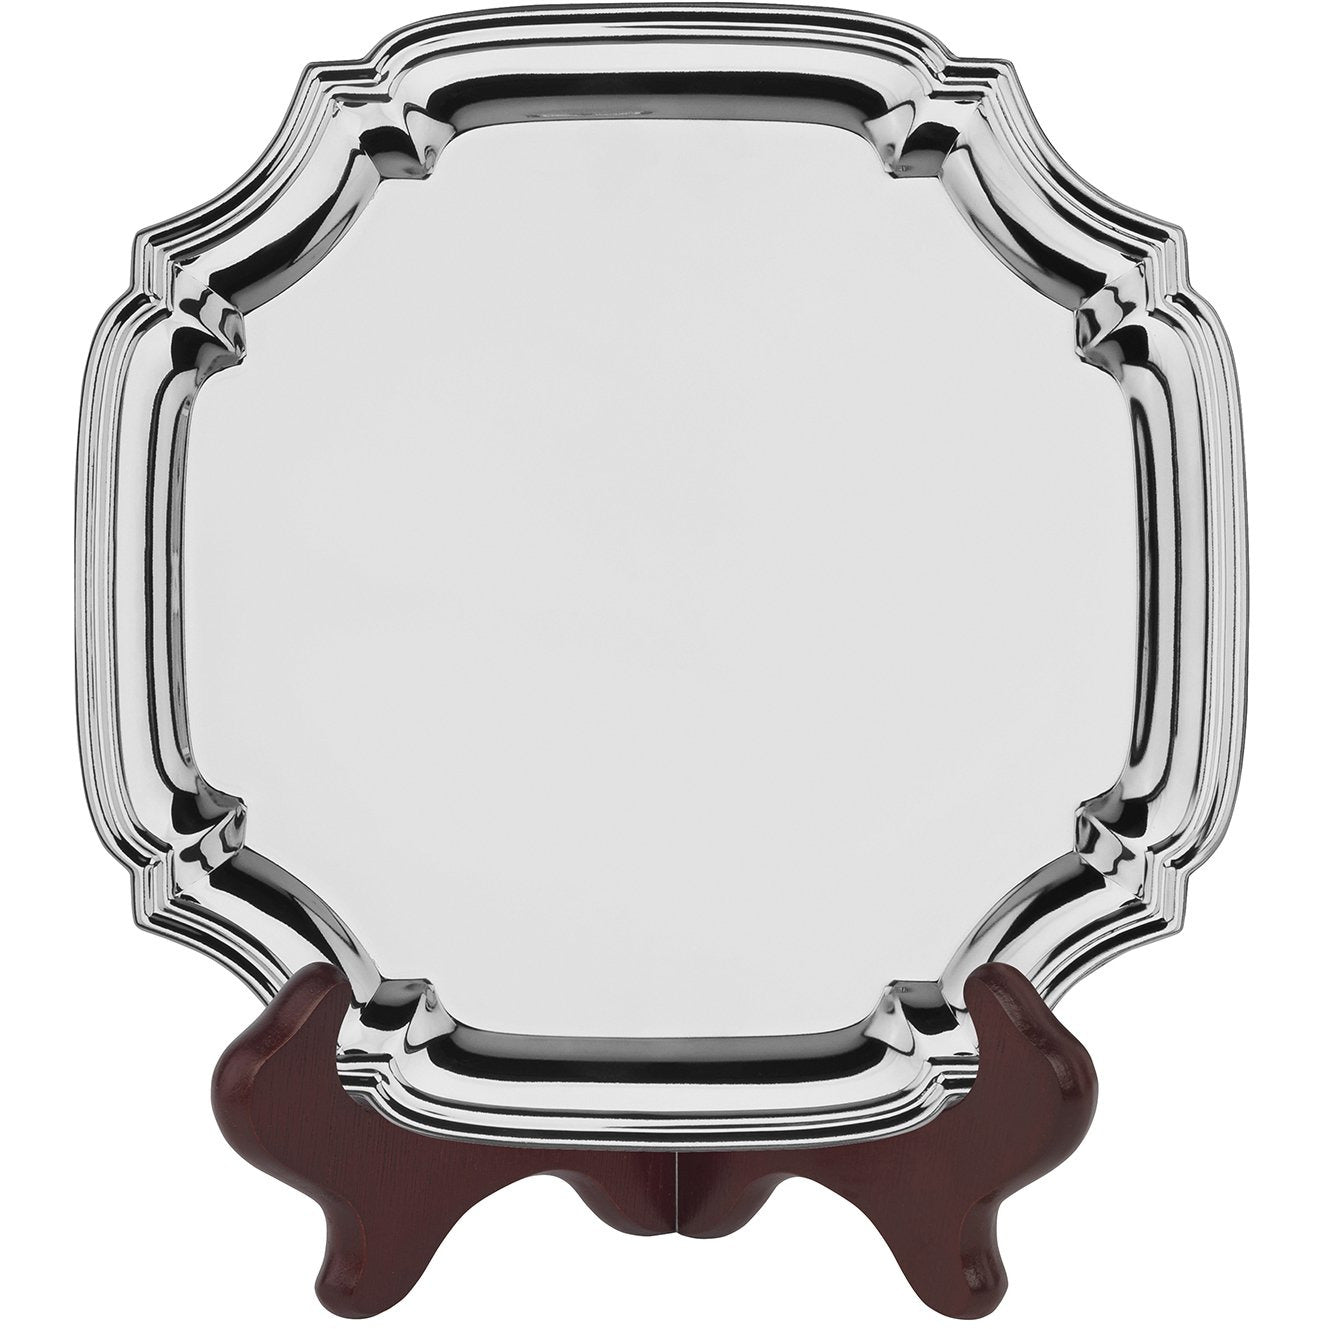 Square Chippendale Salver (Tray) - Nickel Plated - With Presentation Box & Plastic Stand